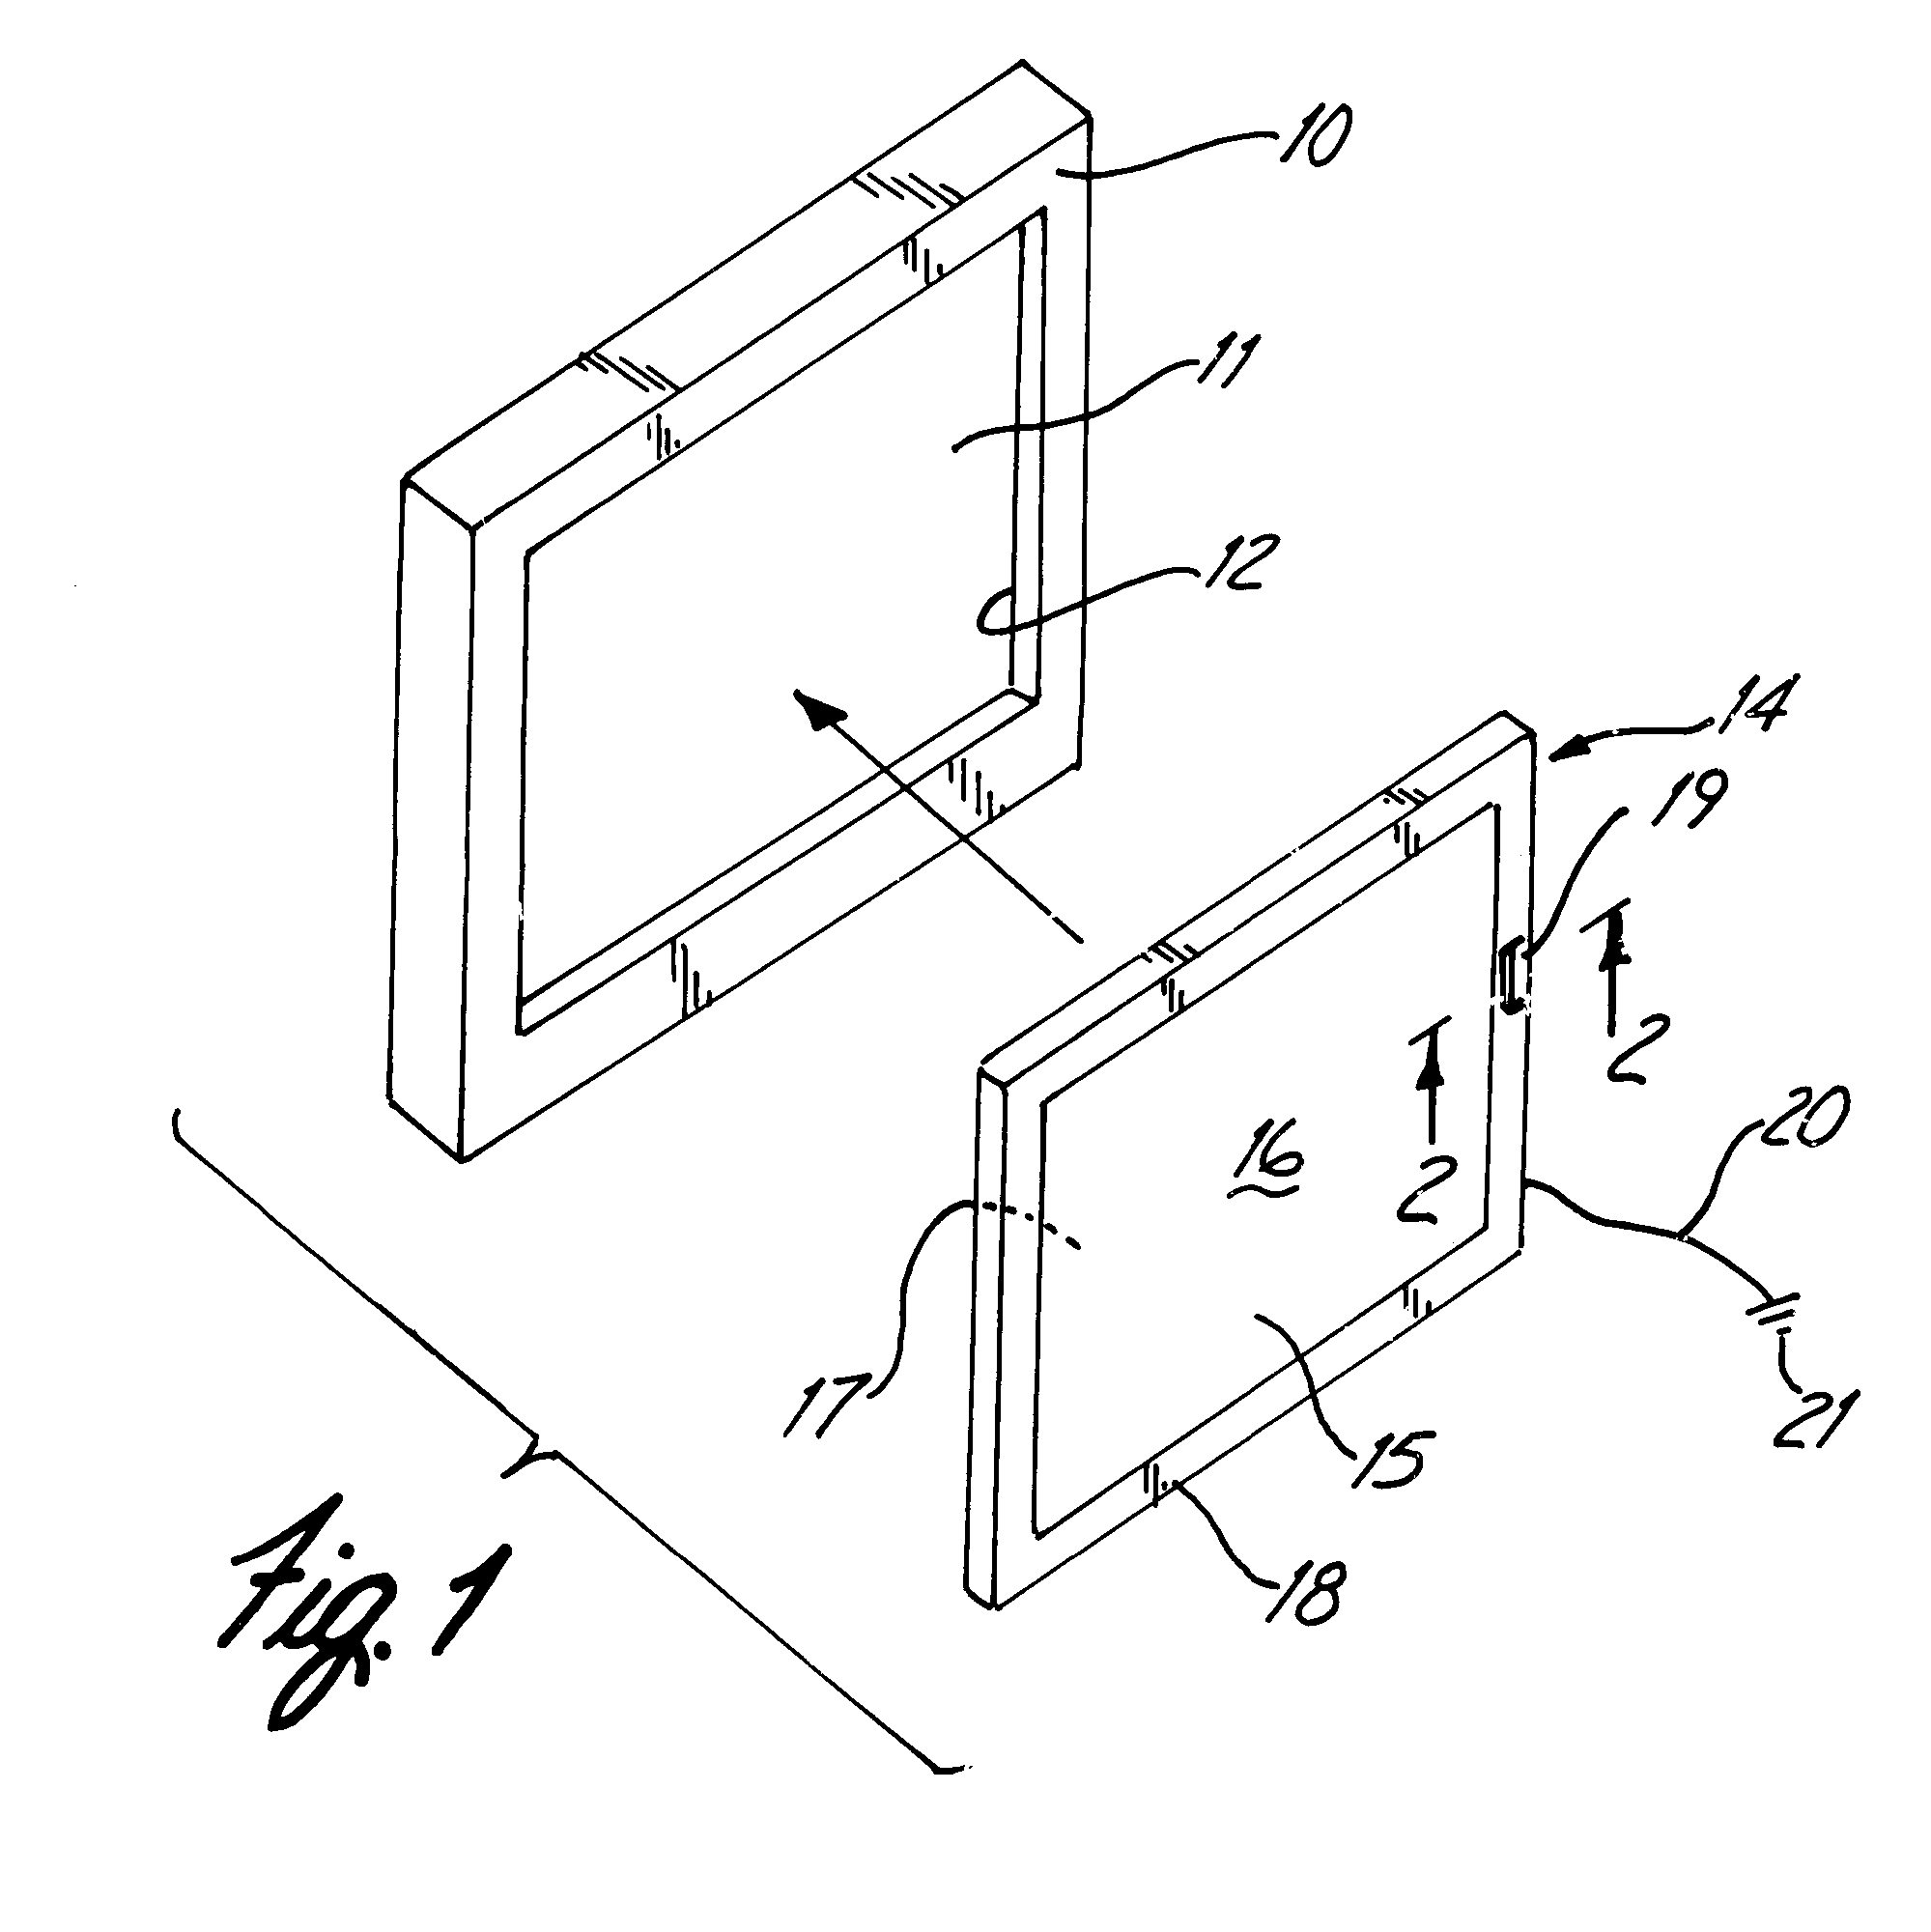 Display panel filter connection to a display panel